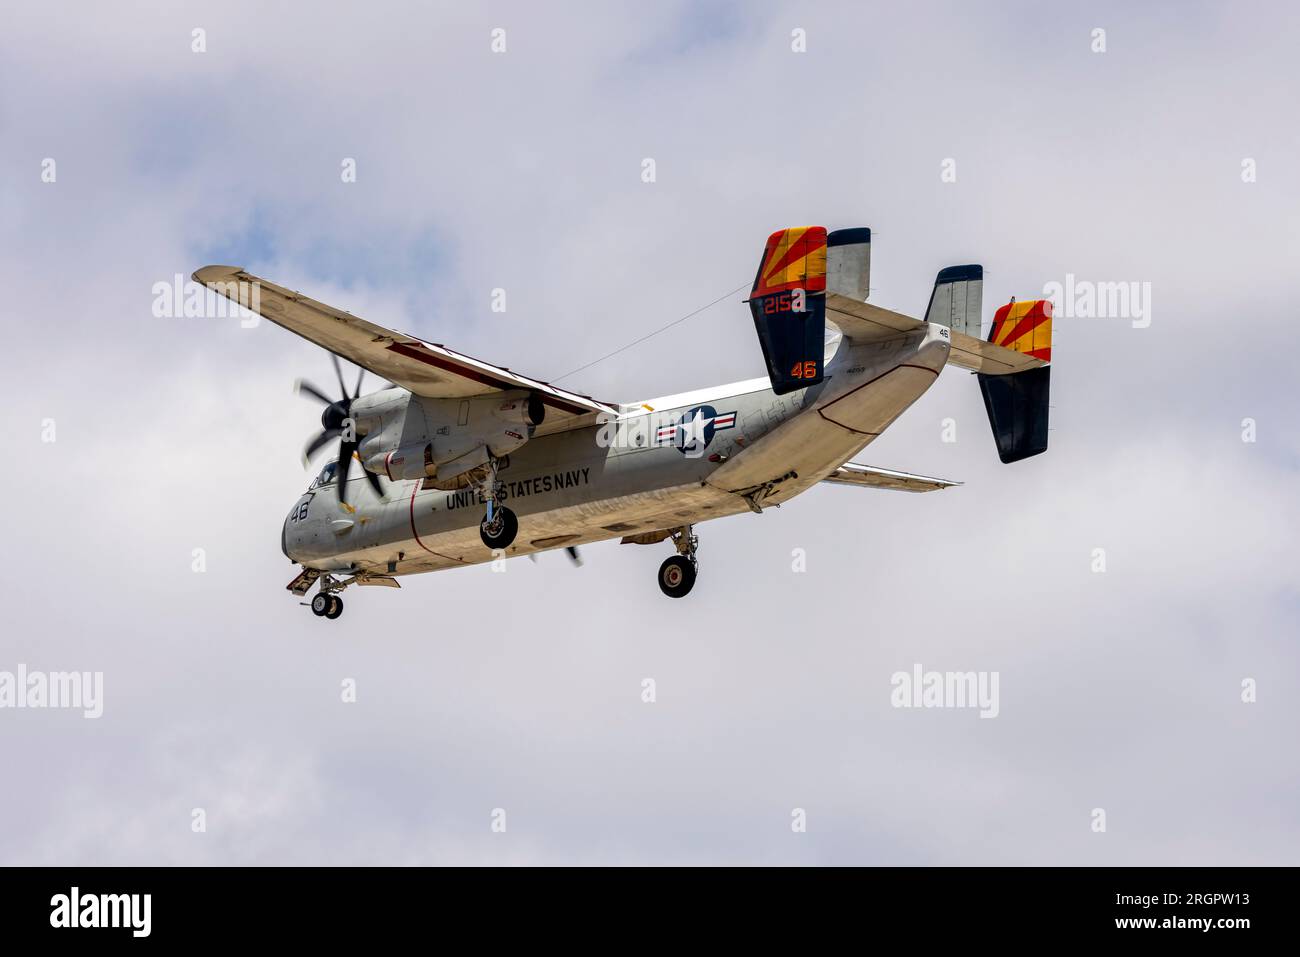 United States Navy Grumman C-2A Greyhound (G-123) (REG: 162159) landed from Sigonella, Sicily and departed to USS Ford. Stock Photo